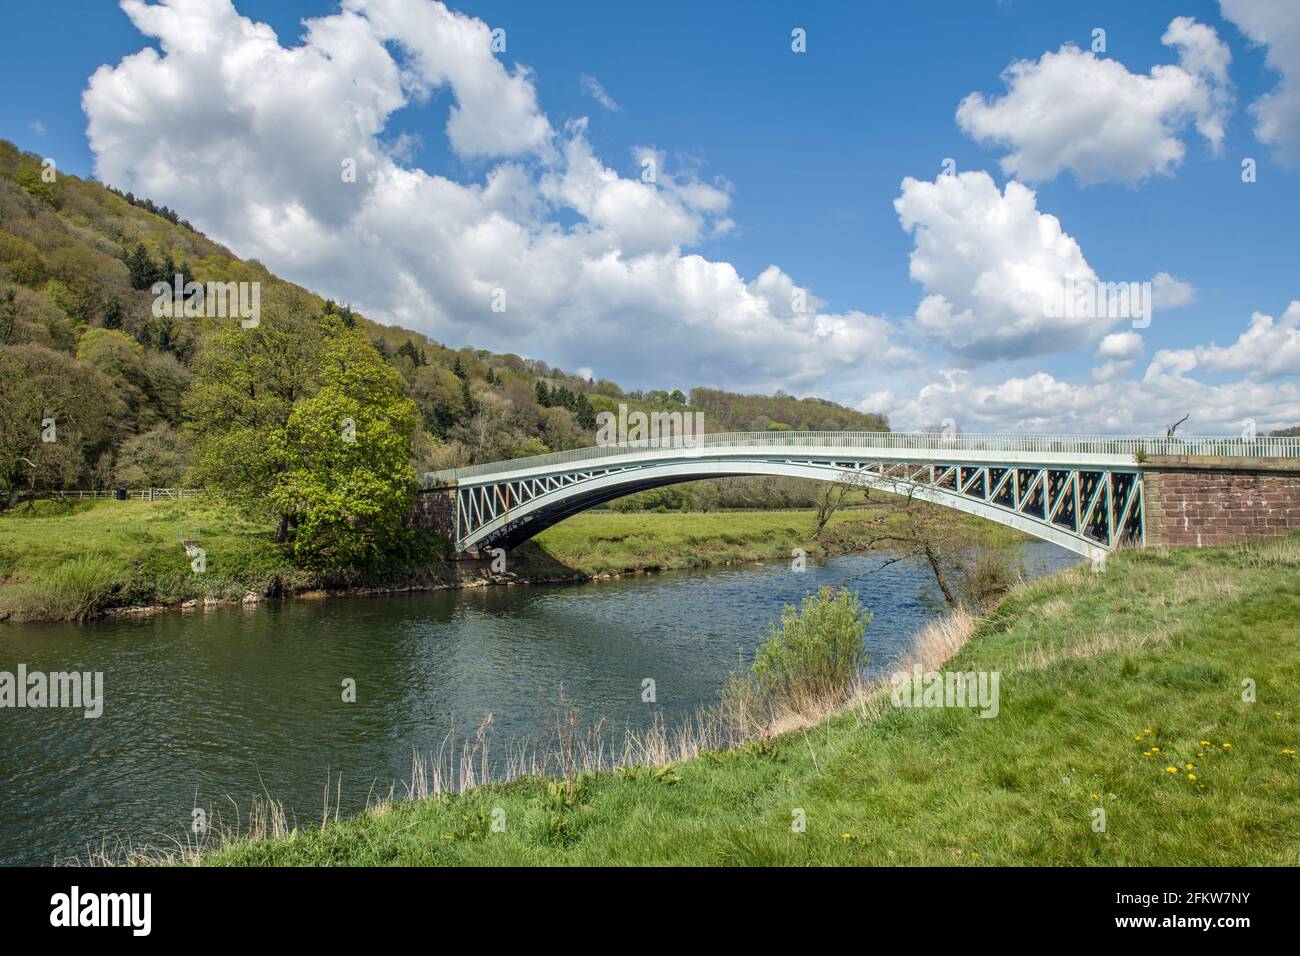 Bigsweir Bridge spanning the River Wye from Wales (on the left) to England (on the right) Stock Photo